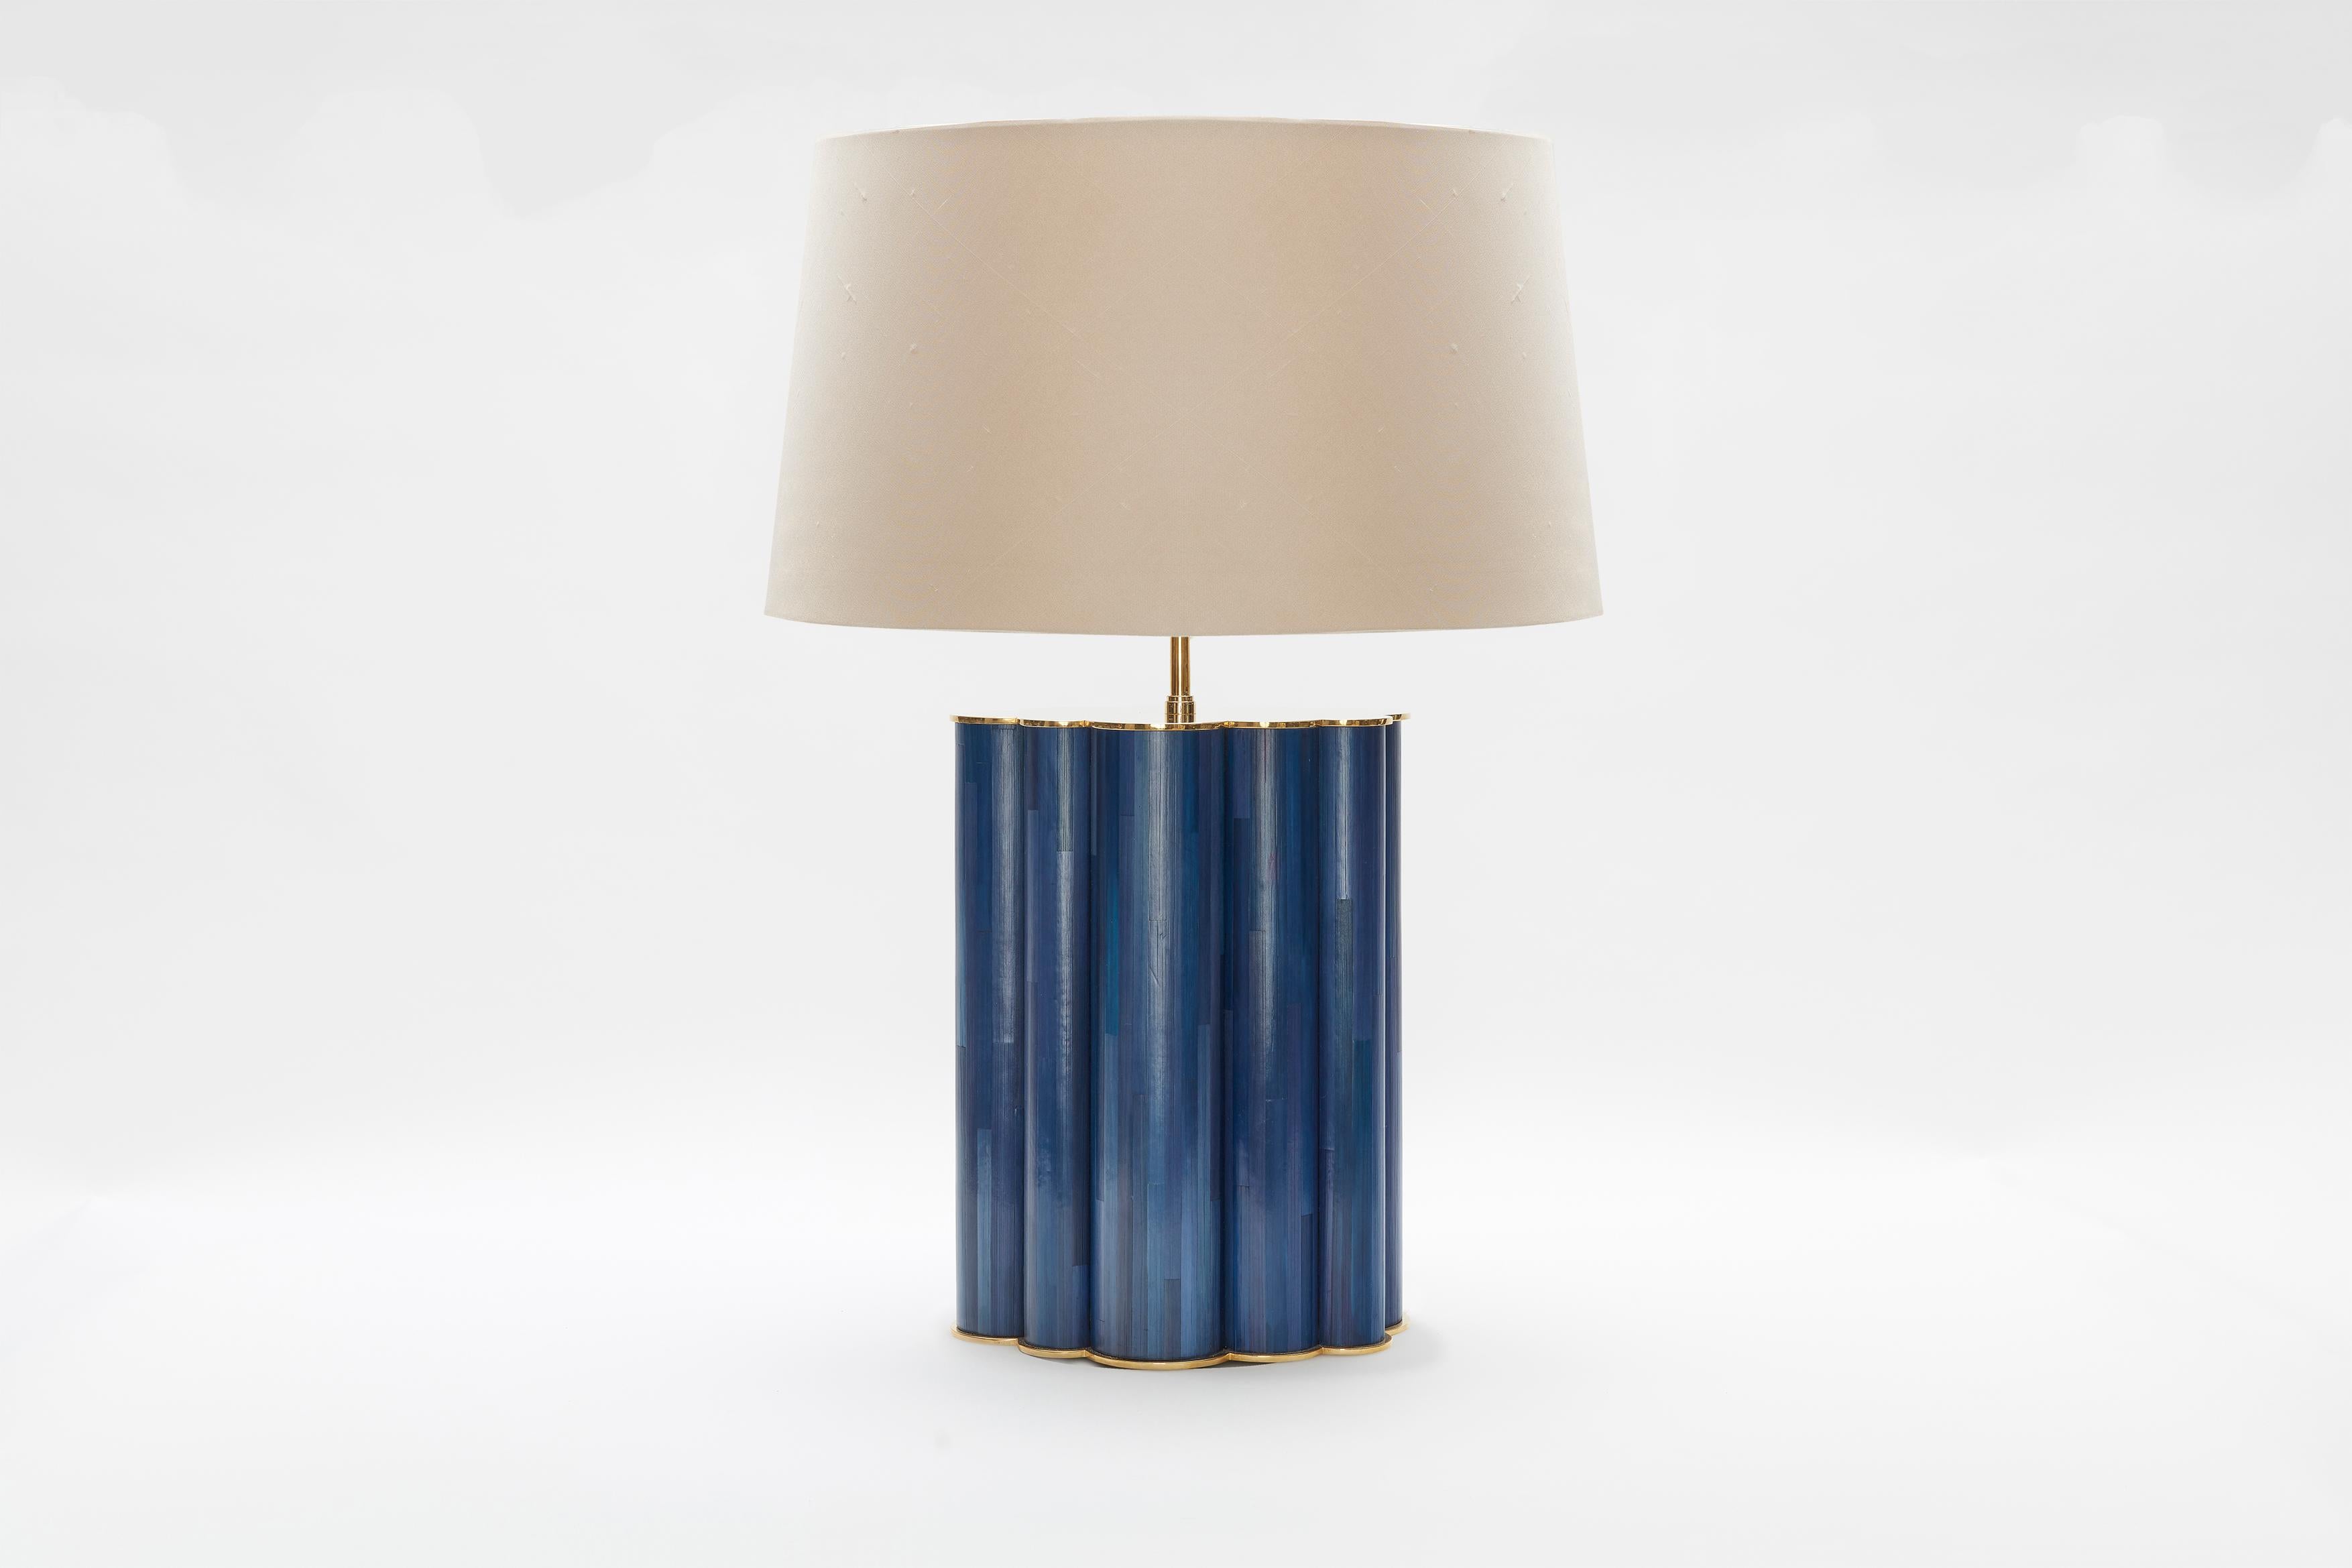 Cloud blue or brown straw marquetry lamp by Simon Orrell Design
Height (not including lampshade) 35cm Width 26 cm Depth 19cm
Finish: Straw Marquetry and brass / Lamp fittings: Bronze
Plug and inline switch: Black or White / Flex: Black, White,